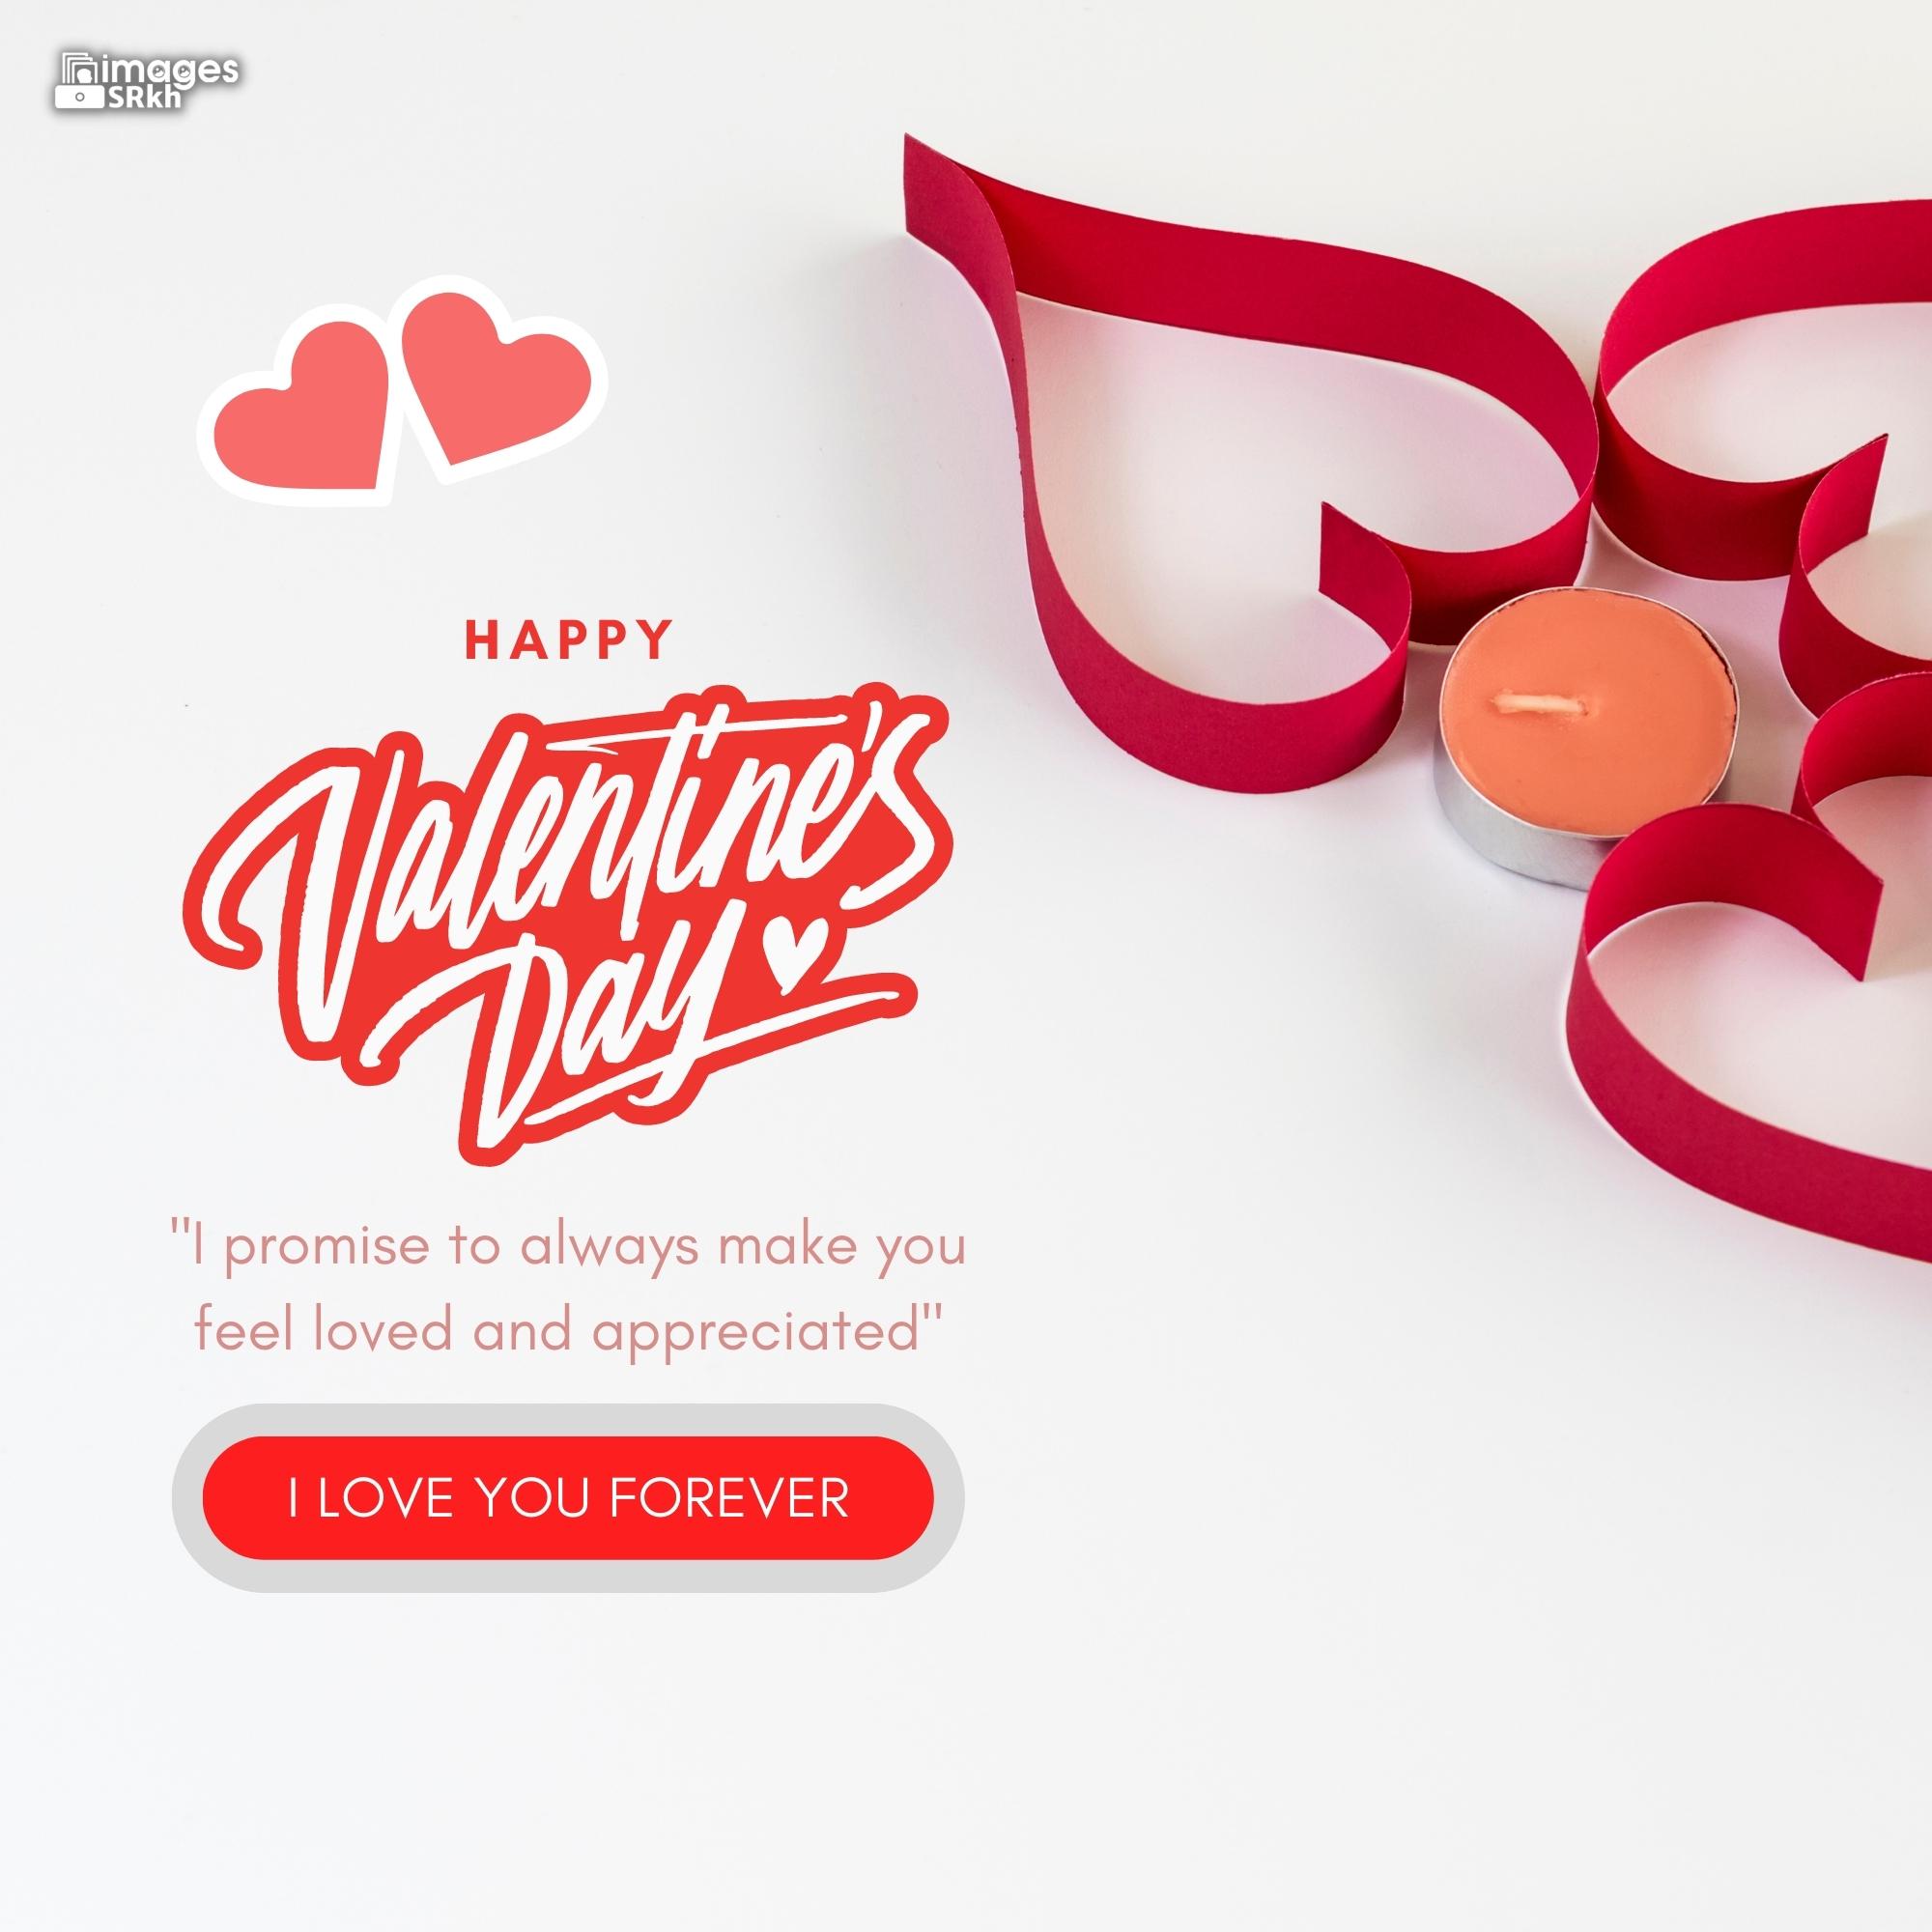 Happy Valentines Day | 521 | PREMIUM IMAGES | Wishes for Love